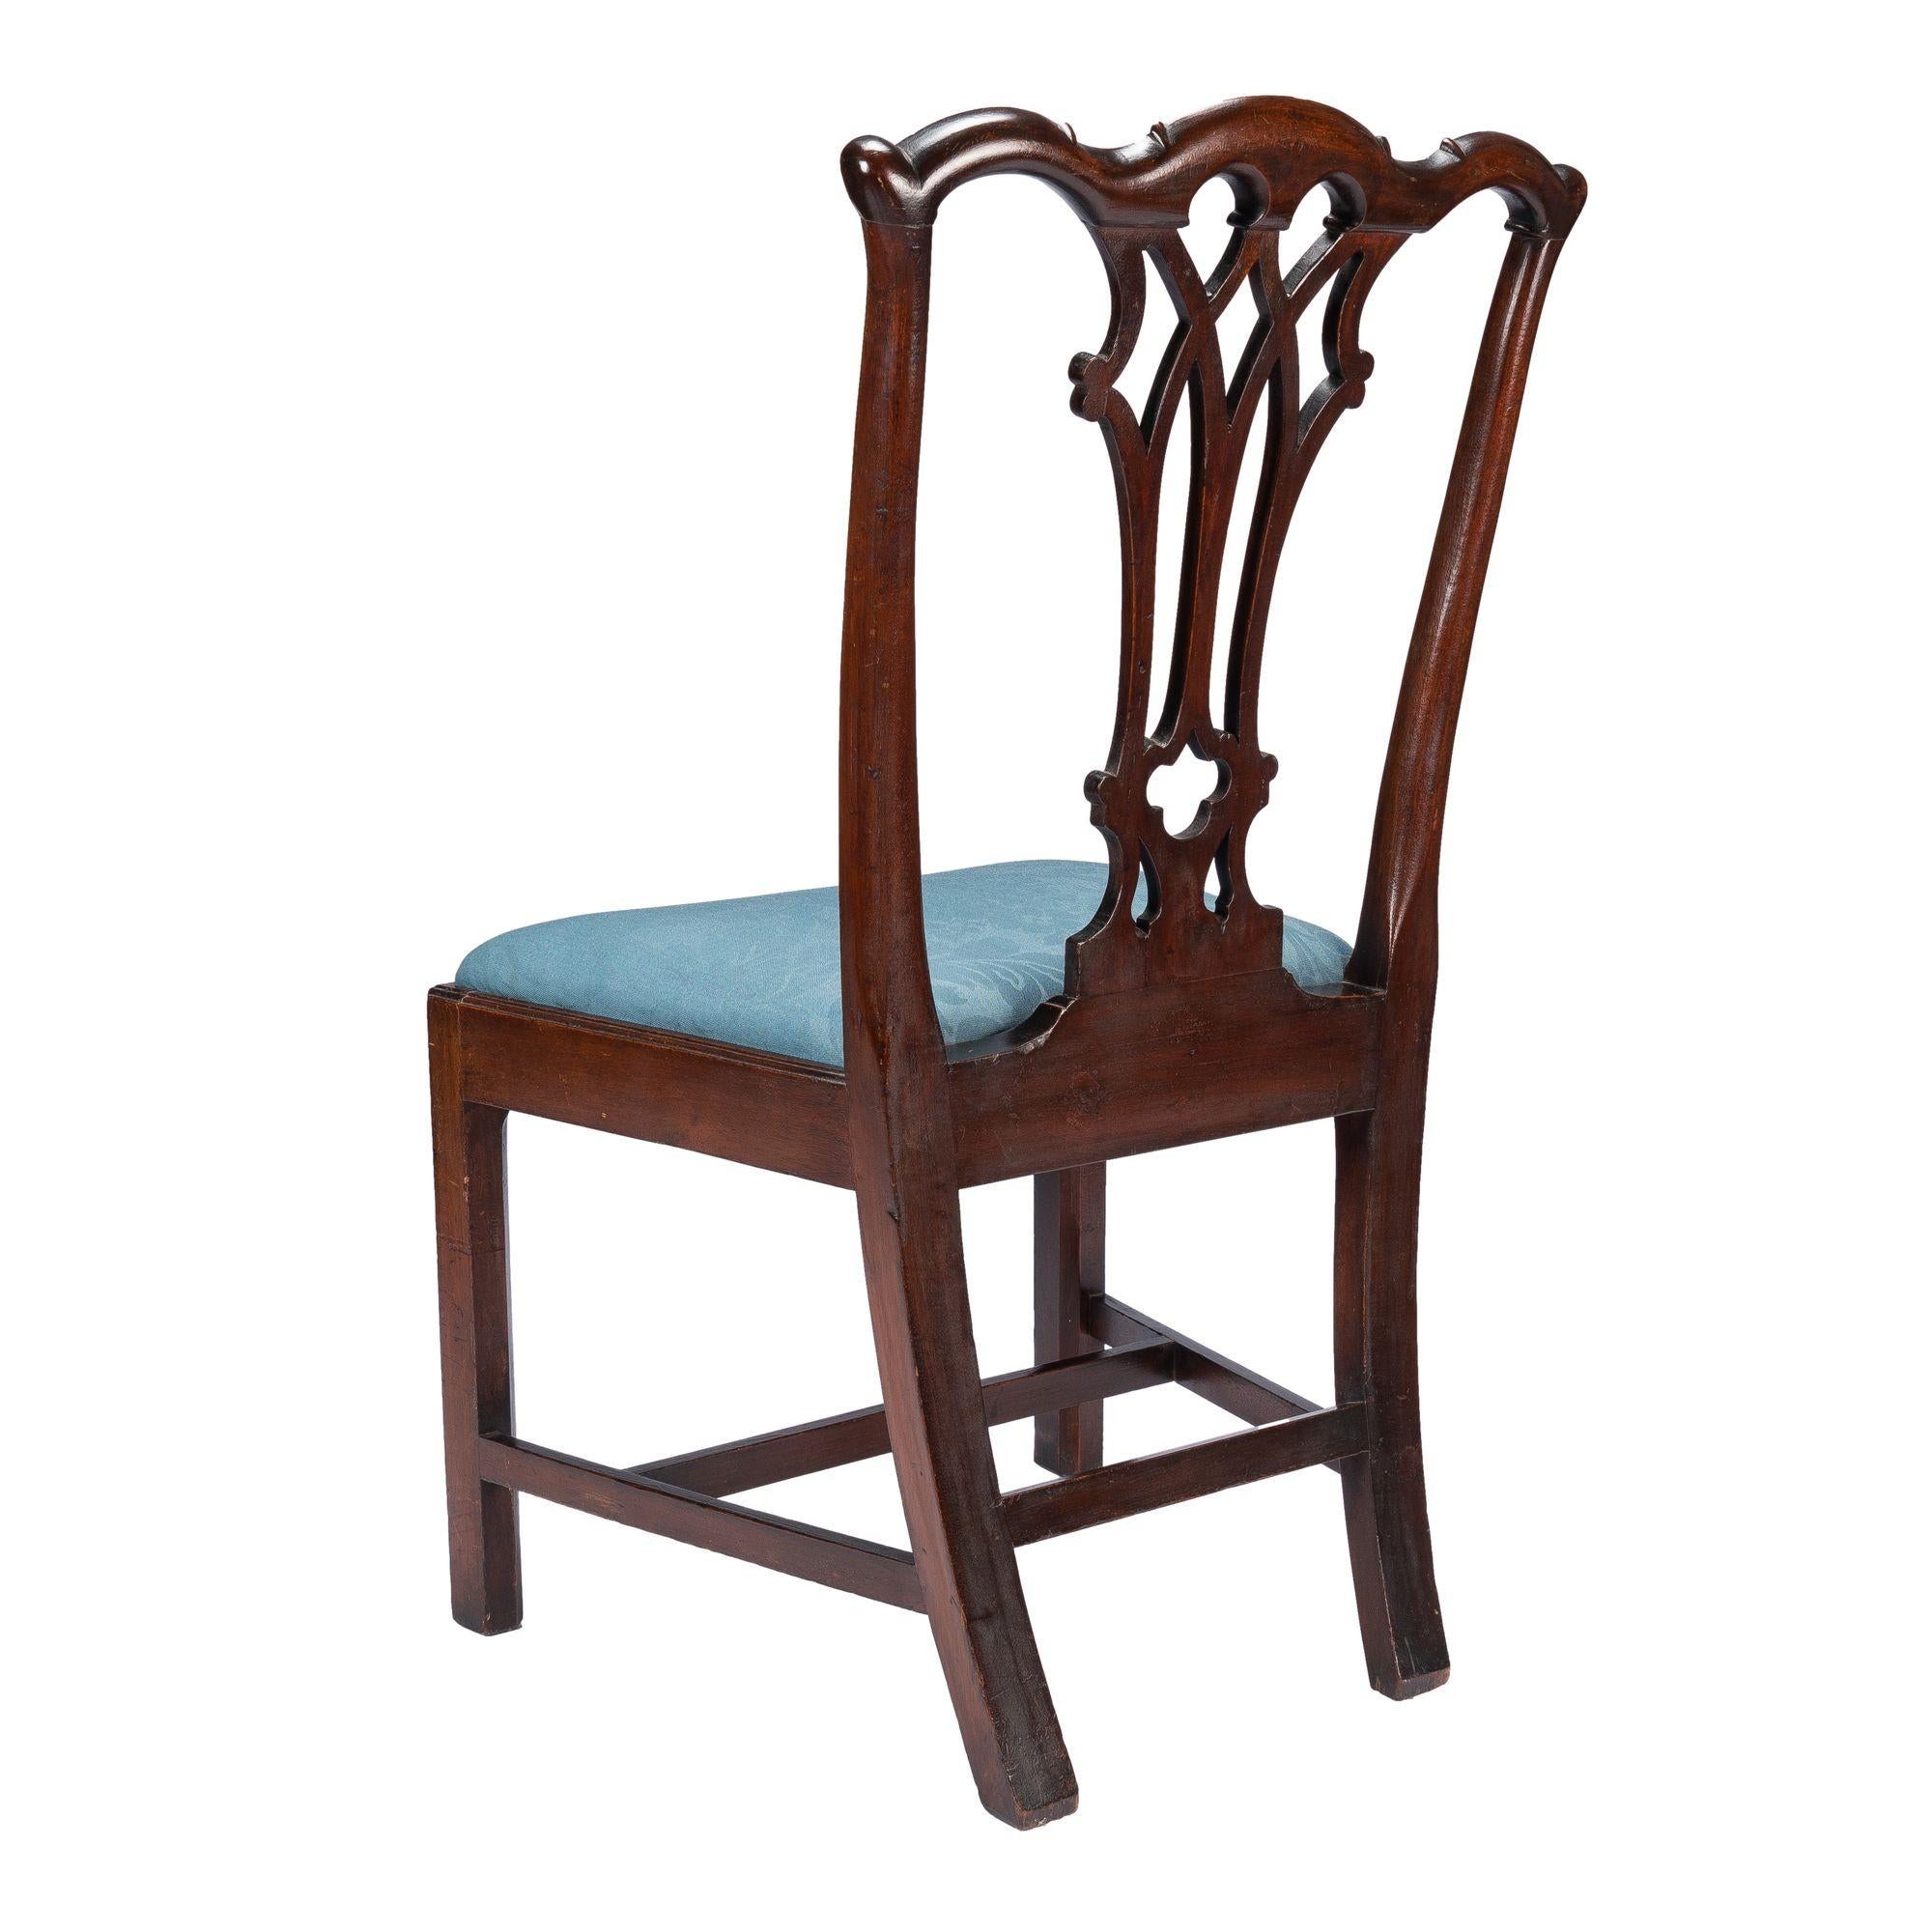 Philadelphia Chippendale Mahogany Slip Seat Side Chair by Thomas Tuft, 1770 In Good Condition For Sale In Kenilworth, IL